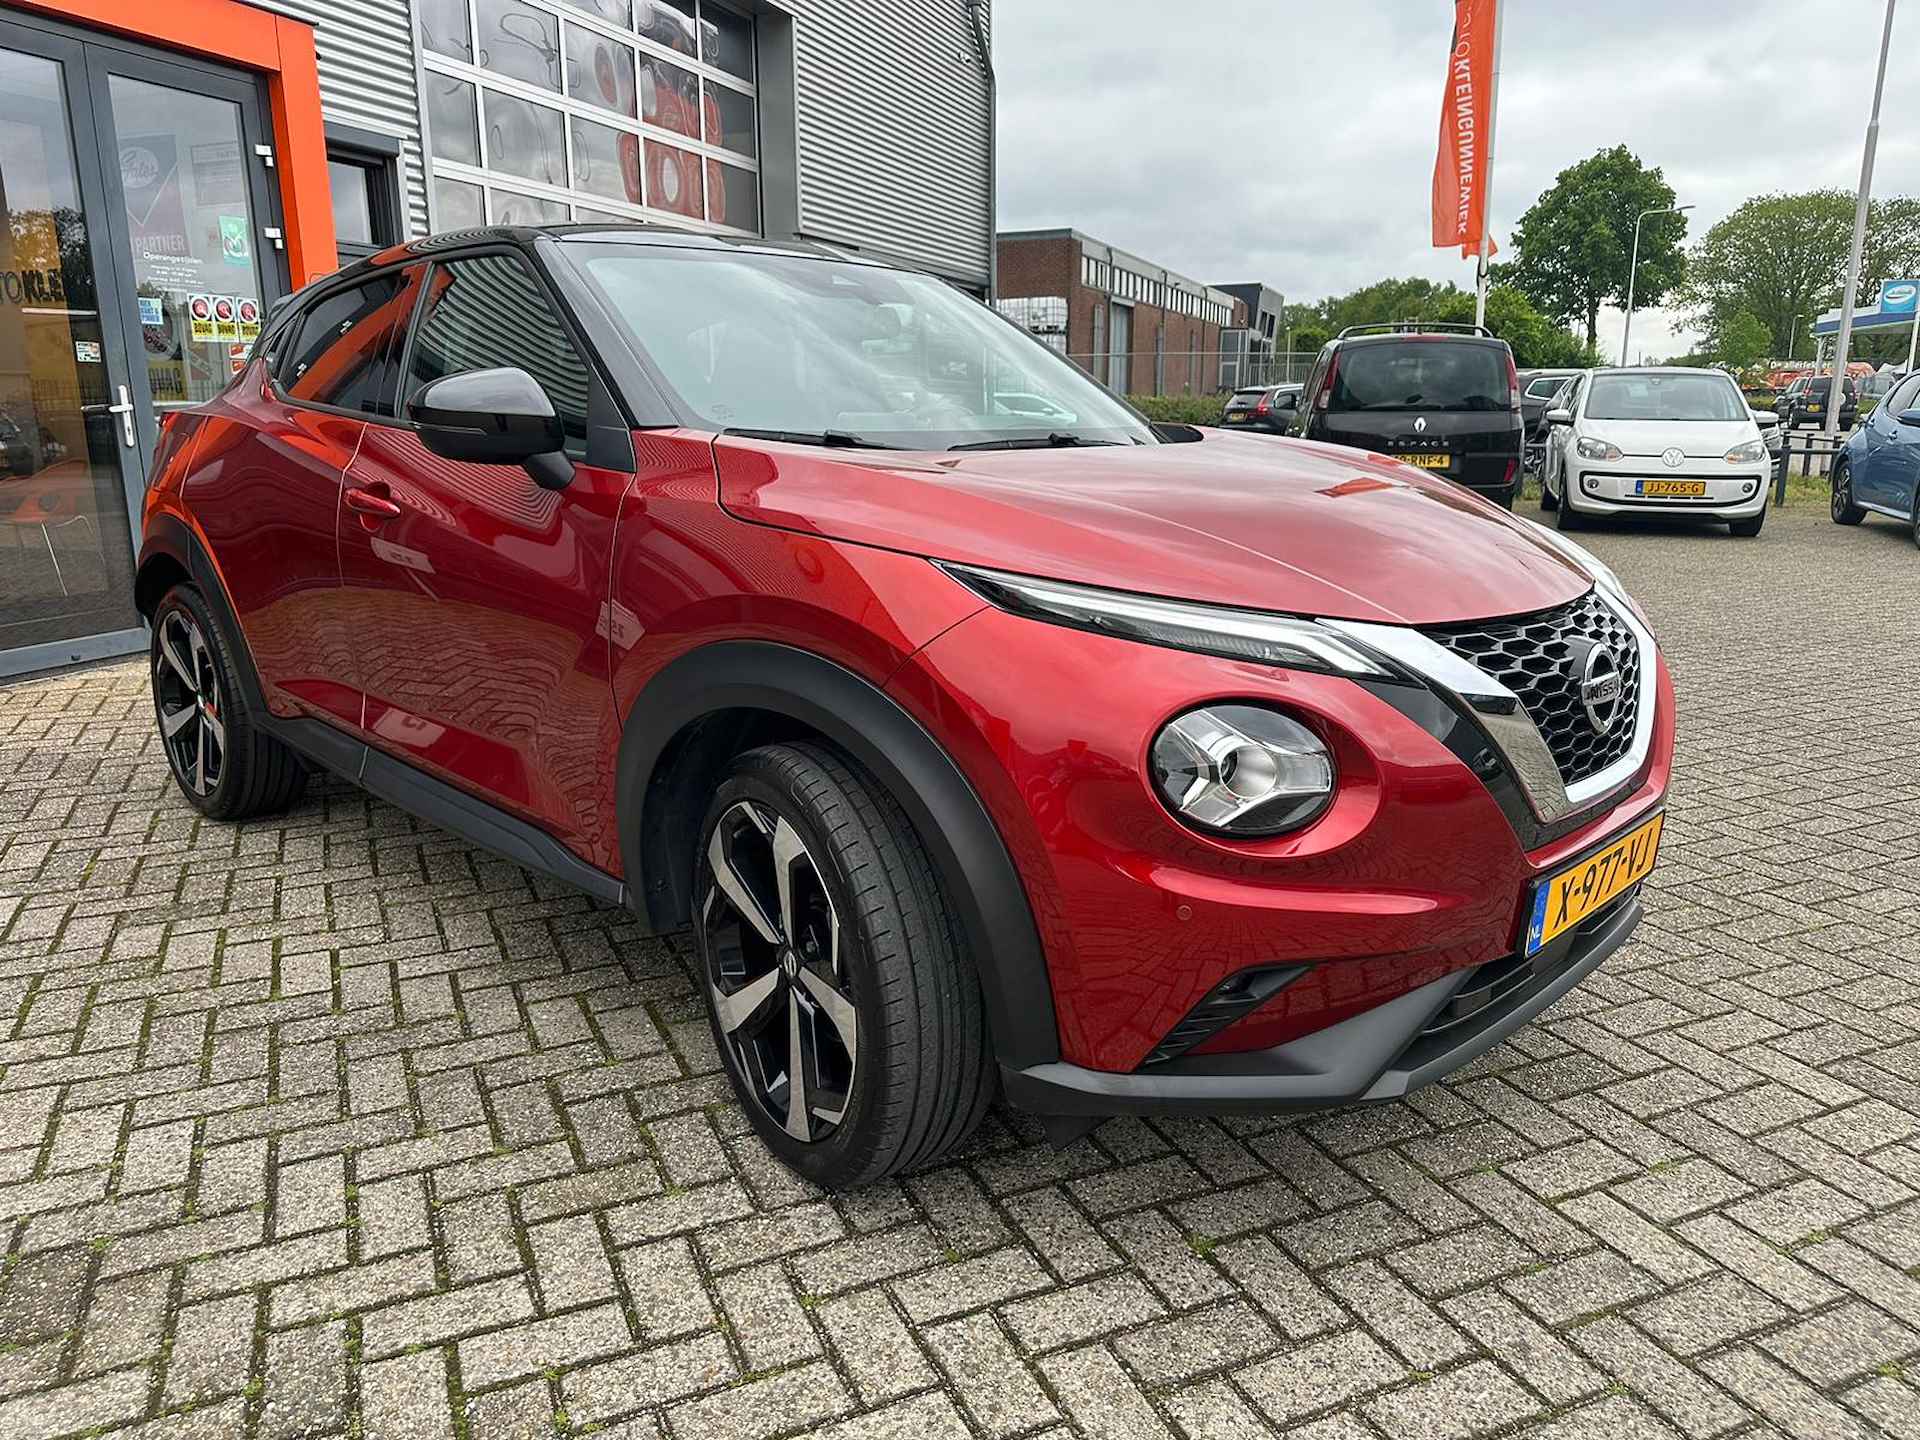 Nissan Juke 1.0 DIG-T Premiere Edition Automaat Apple/Android Carply / Navi / Camera / 19 inch / Cruise Control / Keyless / Start/stop - 9/25